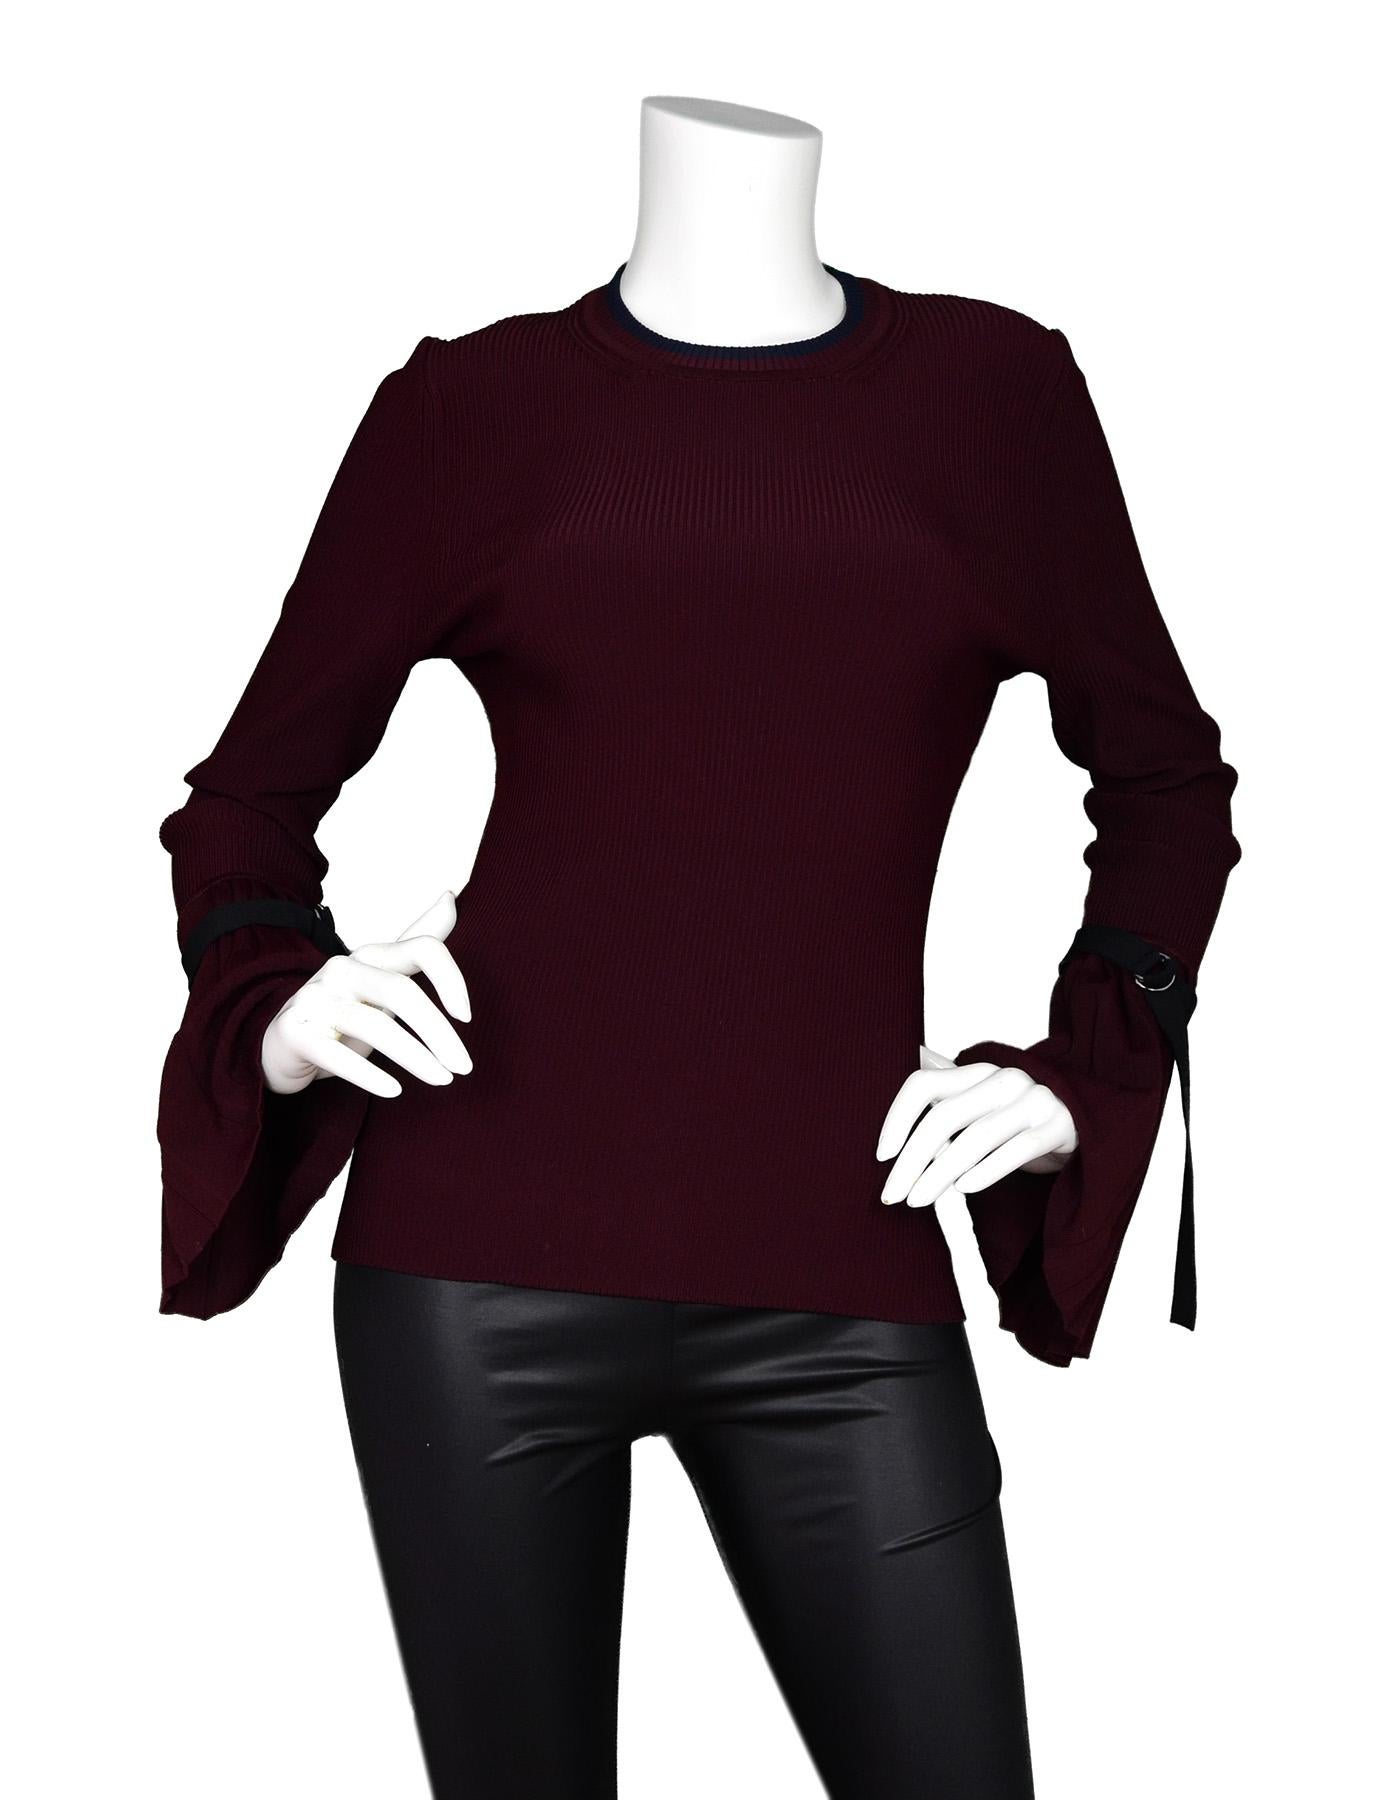 3.1 Phillip Lim Burgundy Flared Pleated Sleeves W/ Black Belt Detailing Rib Knit Sweater Sz S

Made In: China
Color: Burgundy with navy and black detailing 
Materials: Main- 86% viscose, 14% elastane. Belt- 83% viscose, 17% lycra 
Opening/Closure: